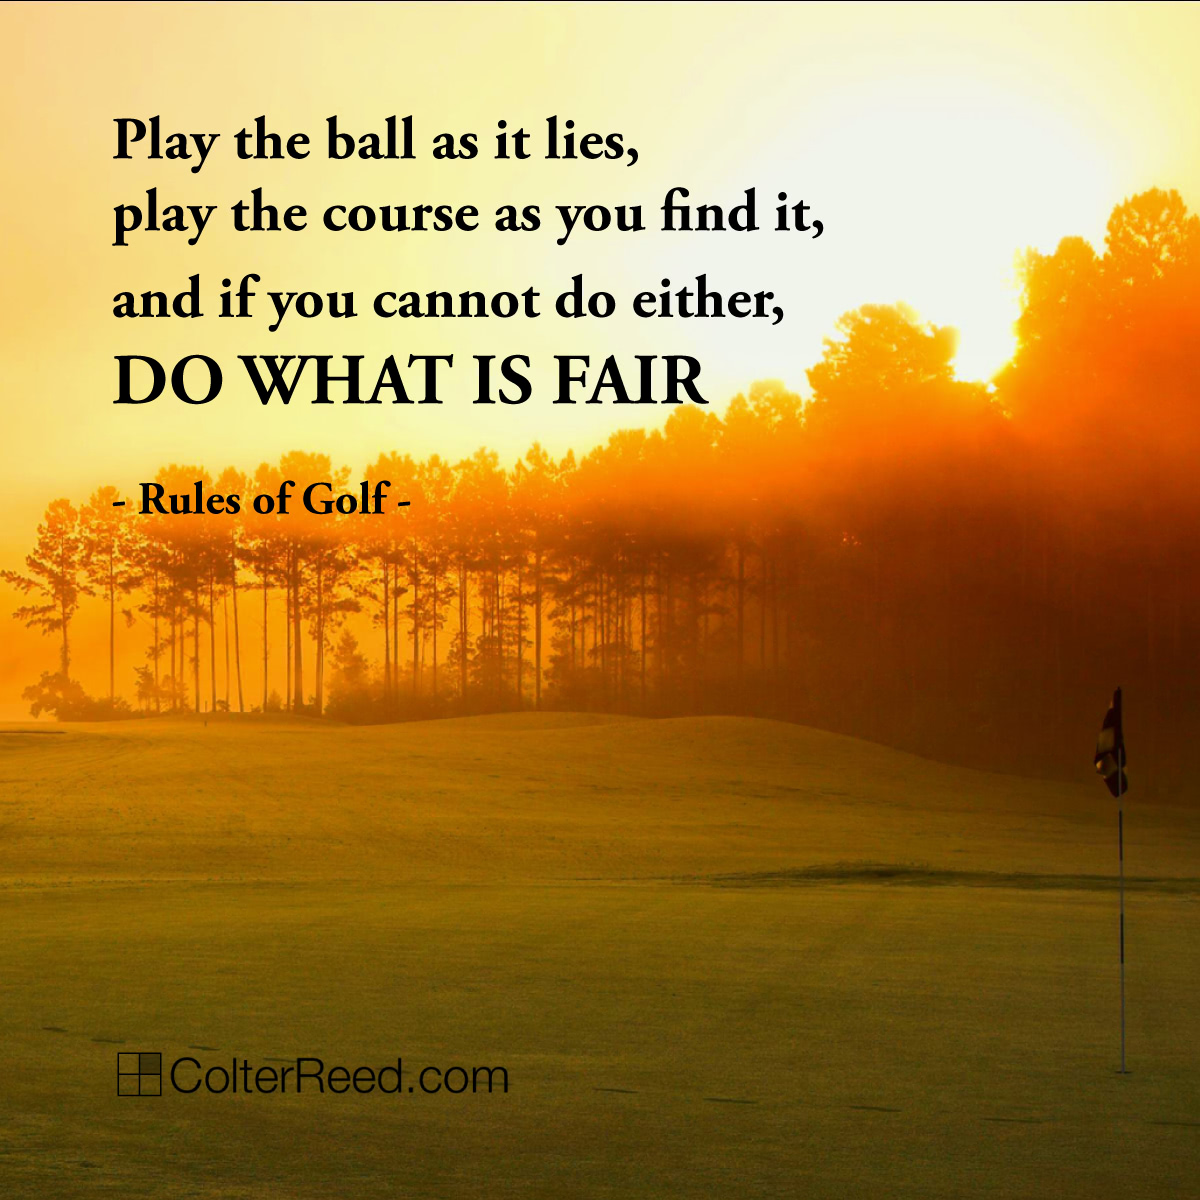 “Play the ball as it lies, play the course as you find it, and if you cannot do either, do what is fair.” —Rules of Golf